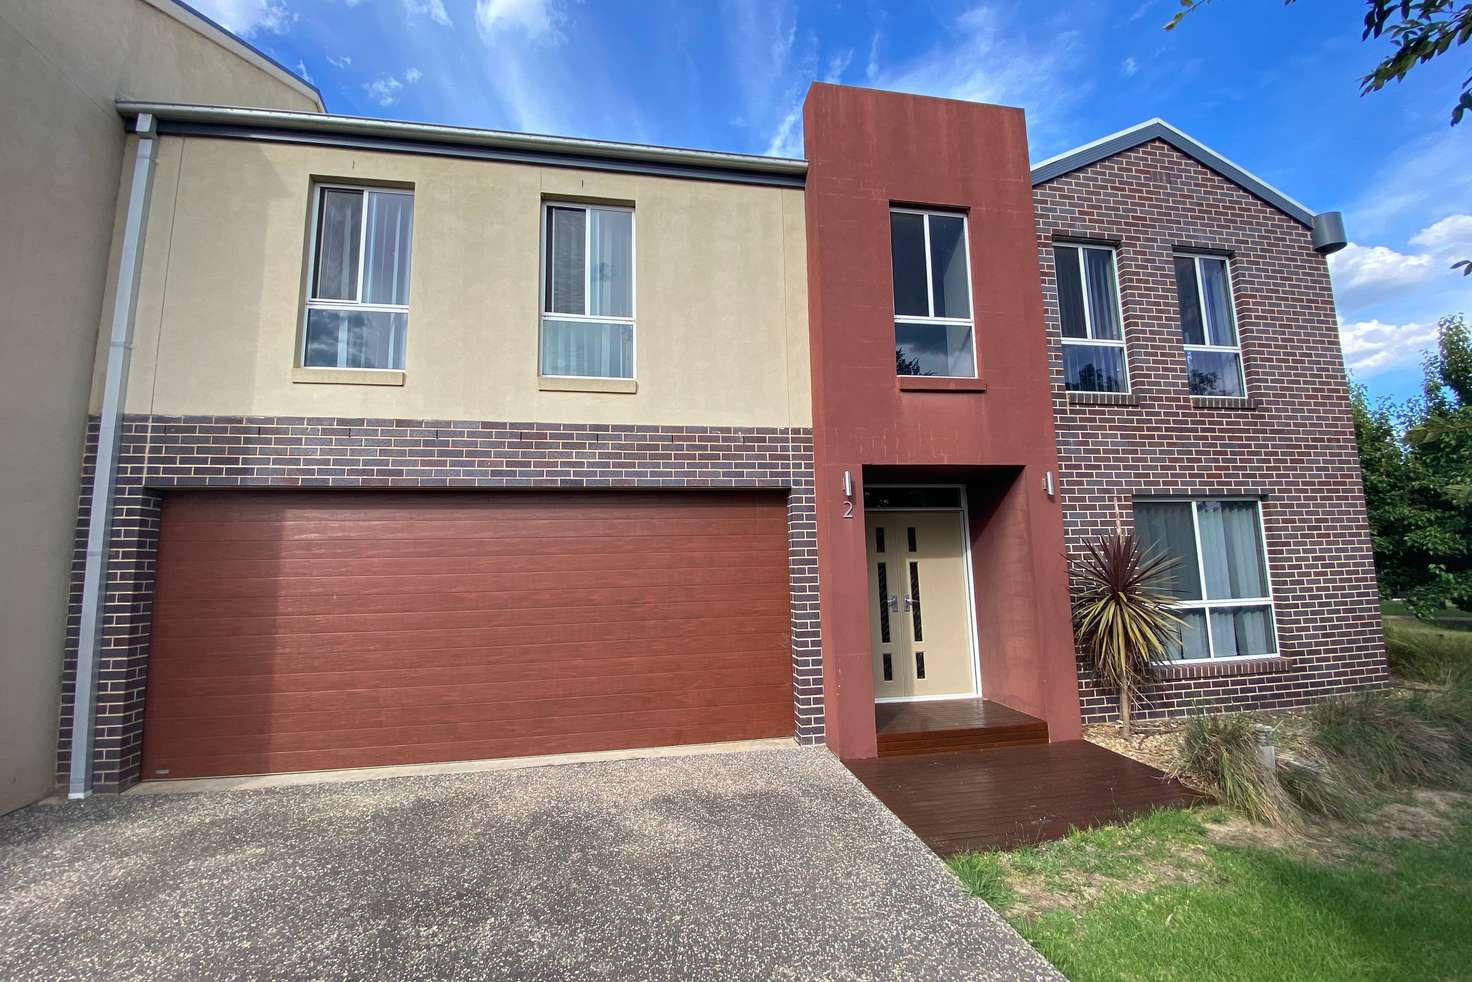 Main view of Homely house listing, 2 Billson Place, Glenroy NSW 2640